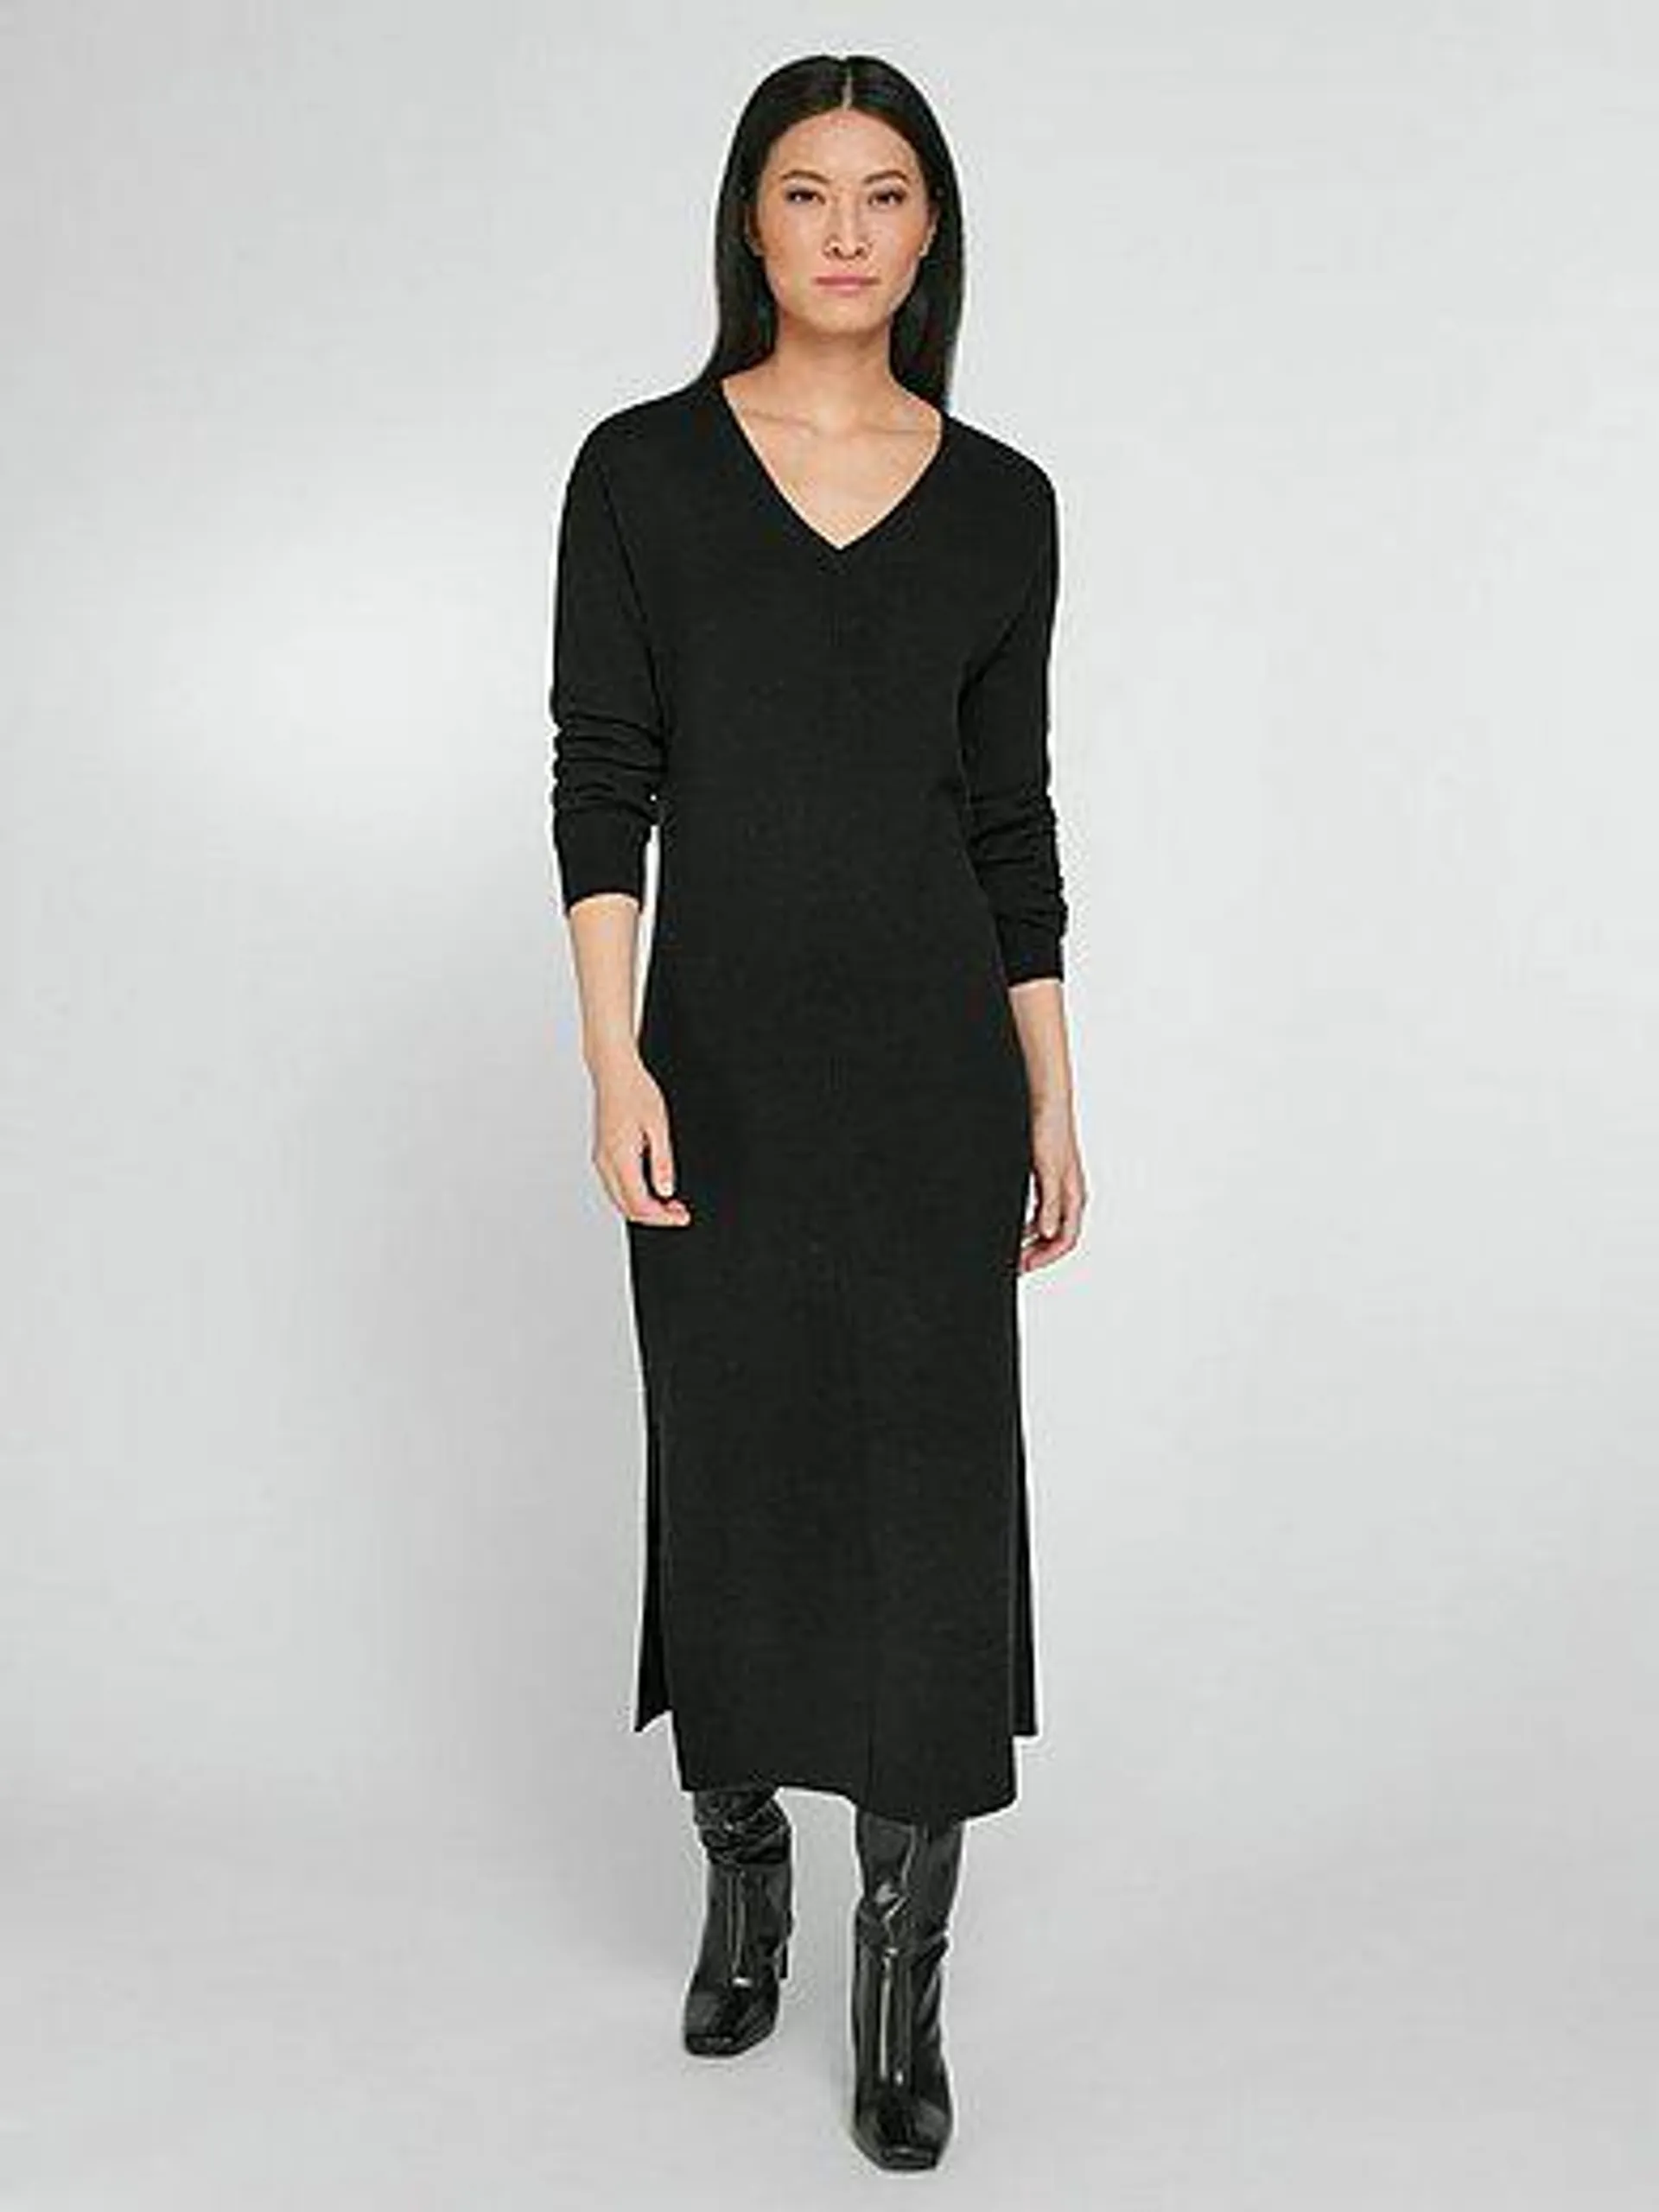 Knitted dress made of pure new wool and cashmere